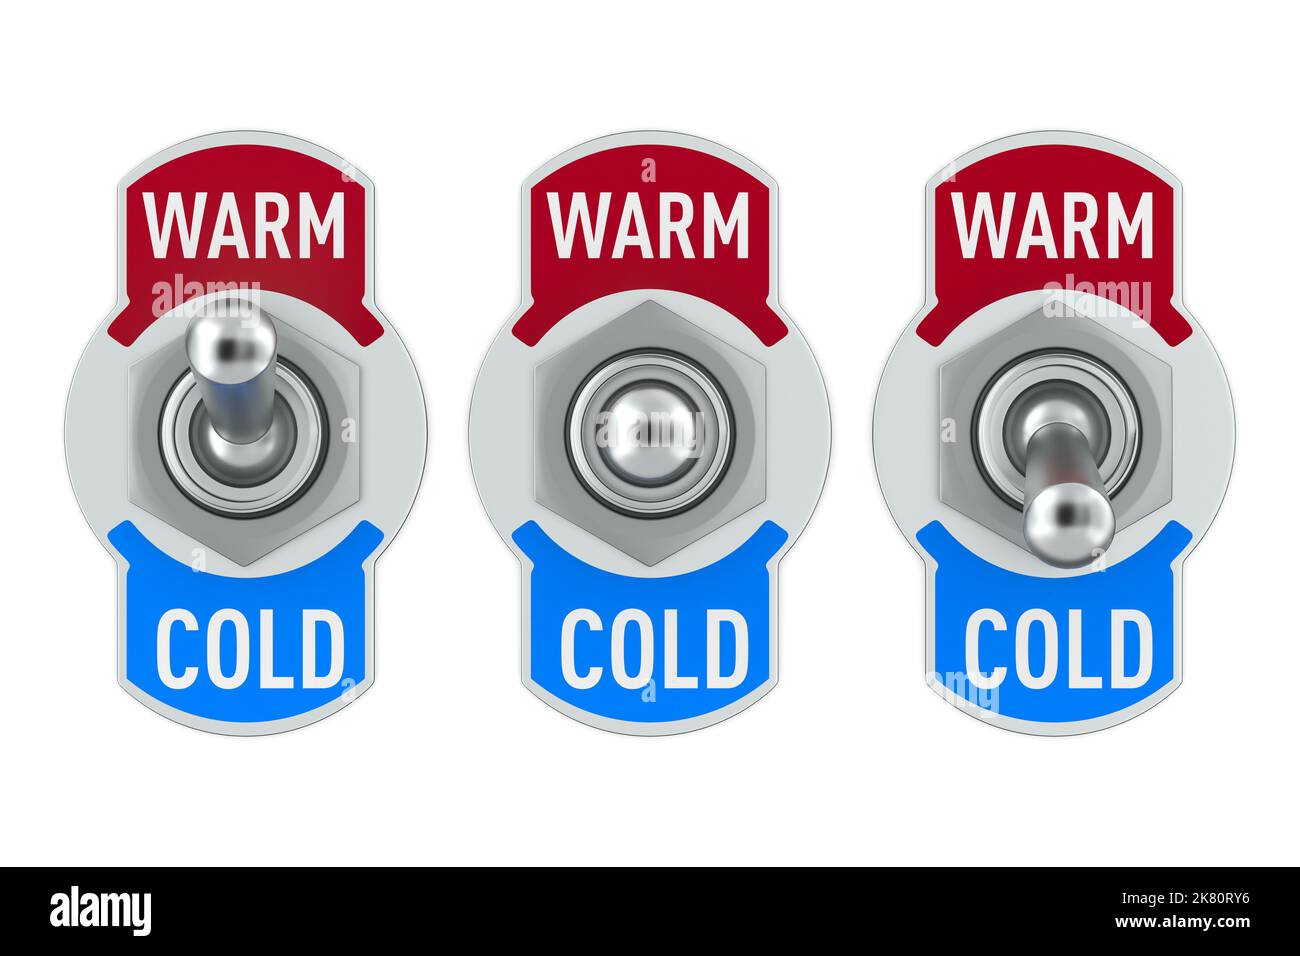 Warm and cold. Toggle switch on white background. Isolated 3D illustration Stock Photo